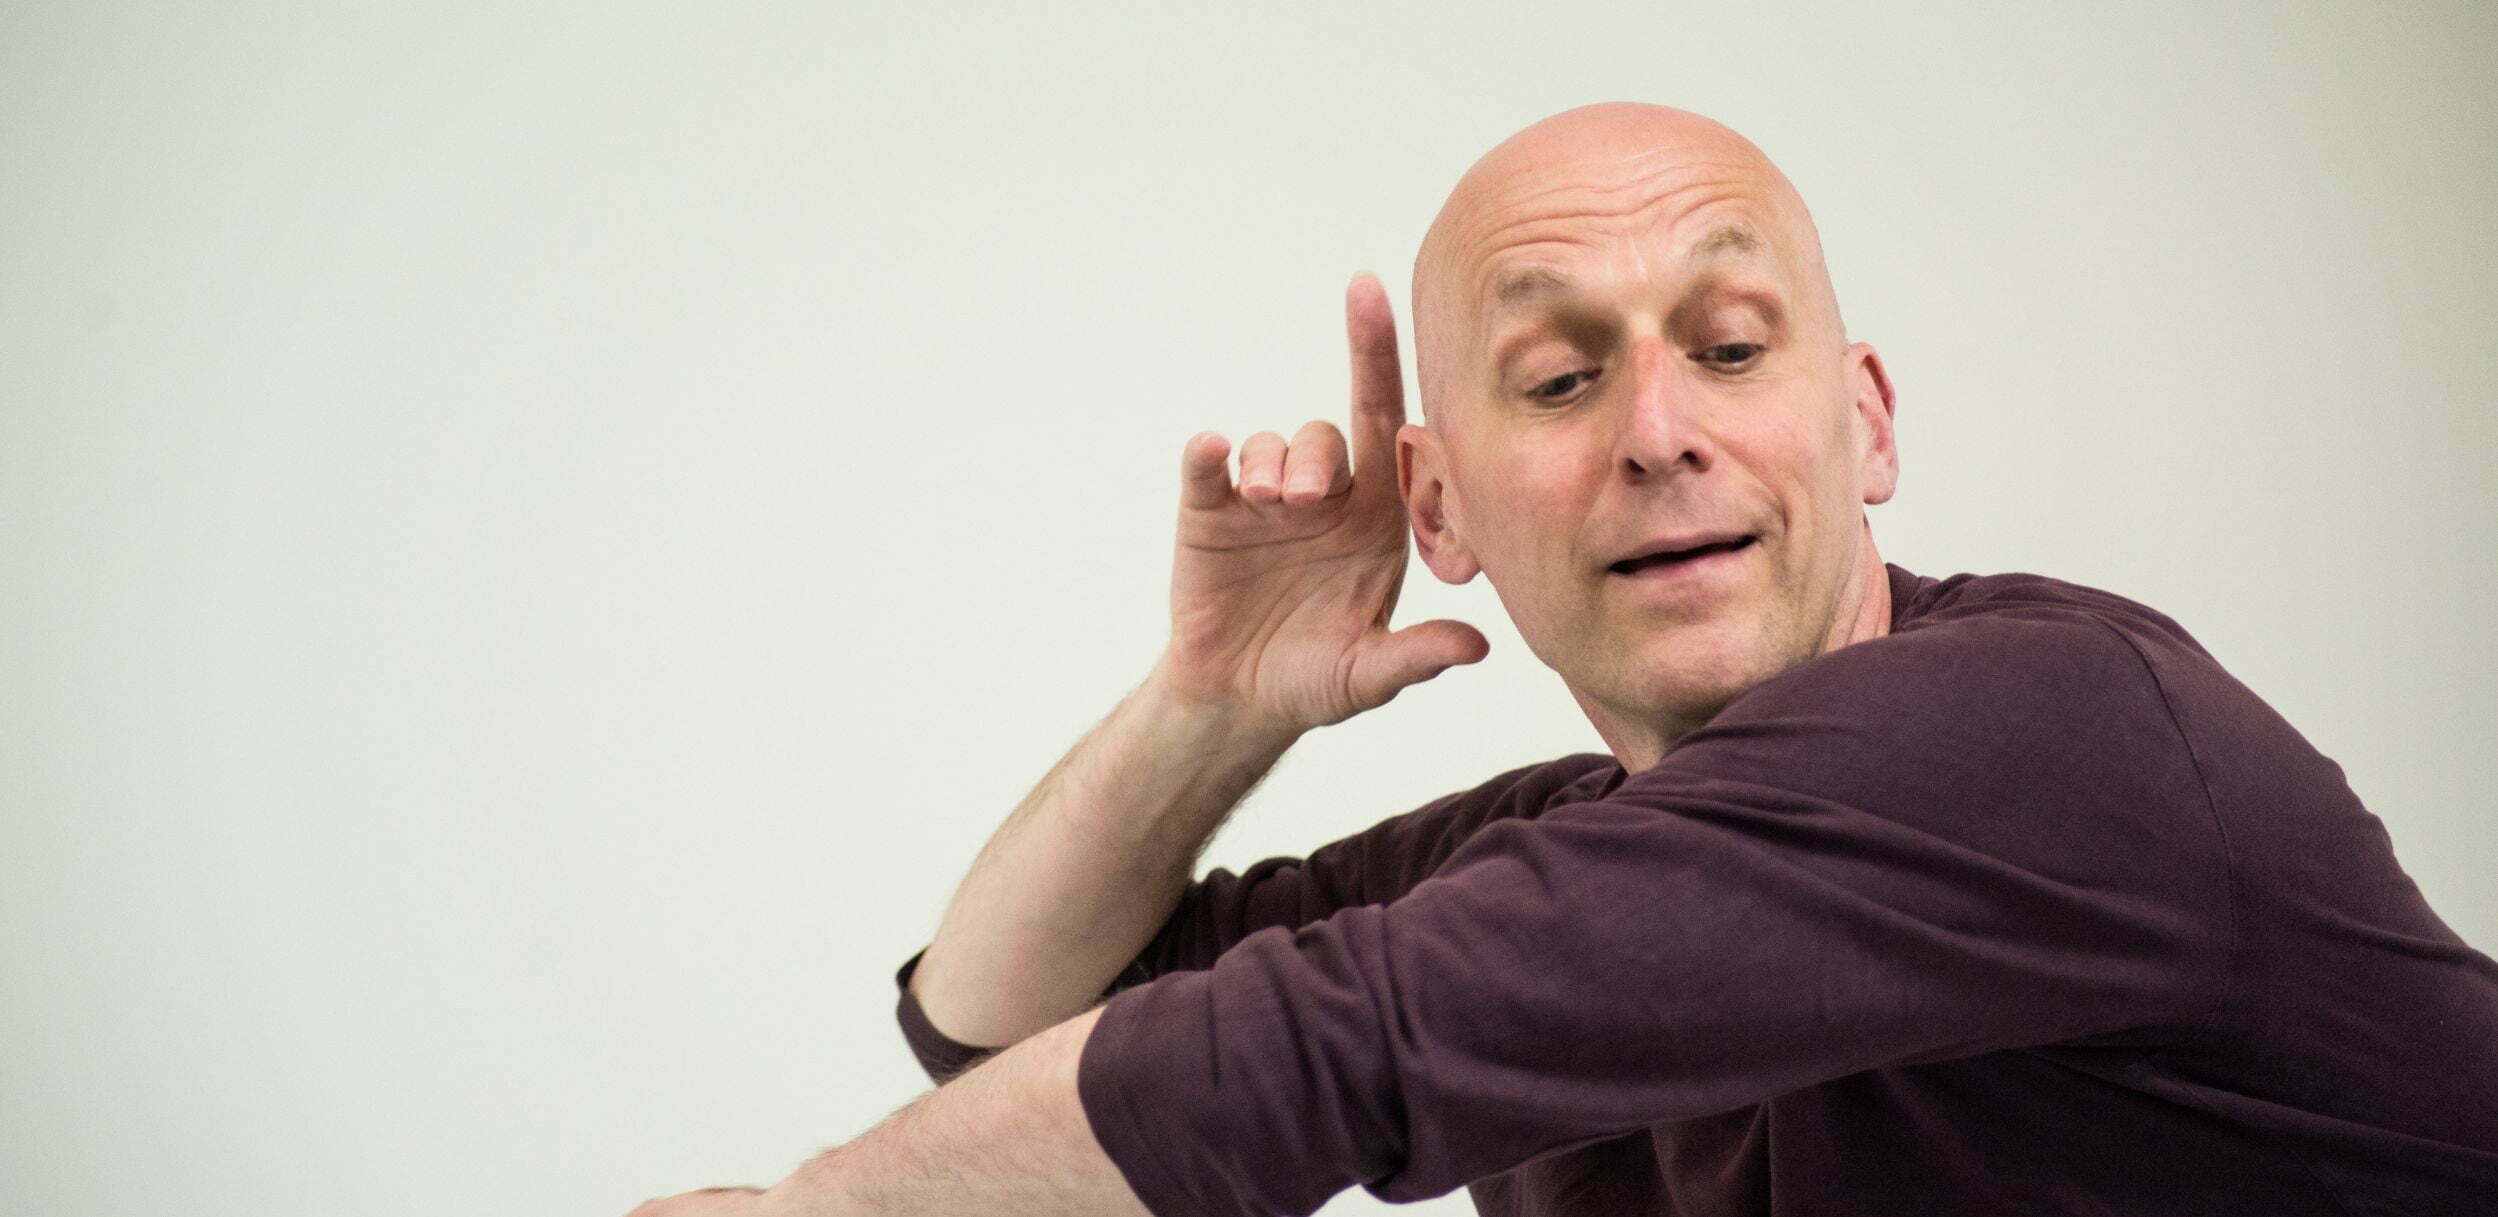 In close-up, a charismatic male dancer in a rich mulberry-coloured t-shirt poises his enfolding arms - one vertical and the other horizontal. He rests his right elbow on the back of his other hand and his right fingers nestle around his ear. Whatever music he is apparently hearing registers in a facial expression of inner bliss